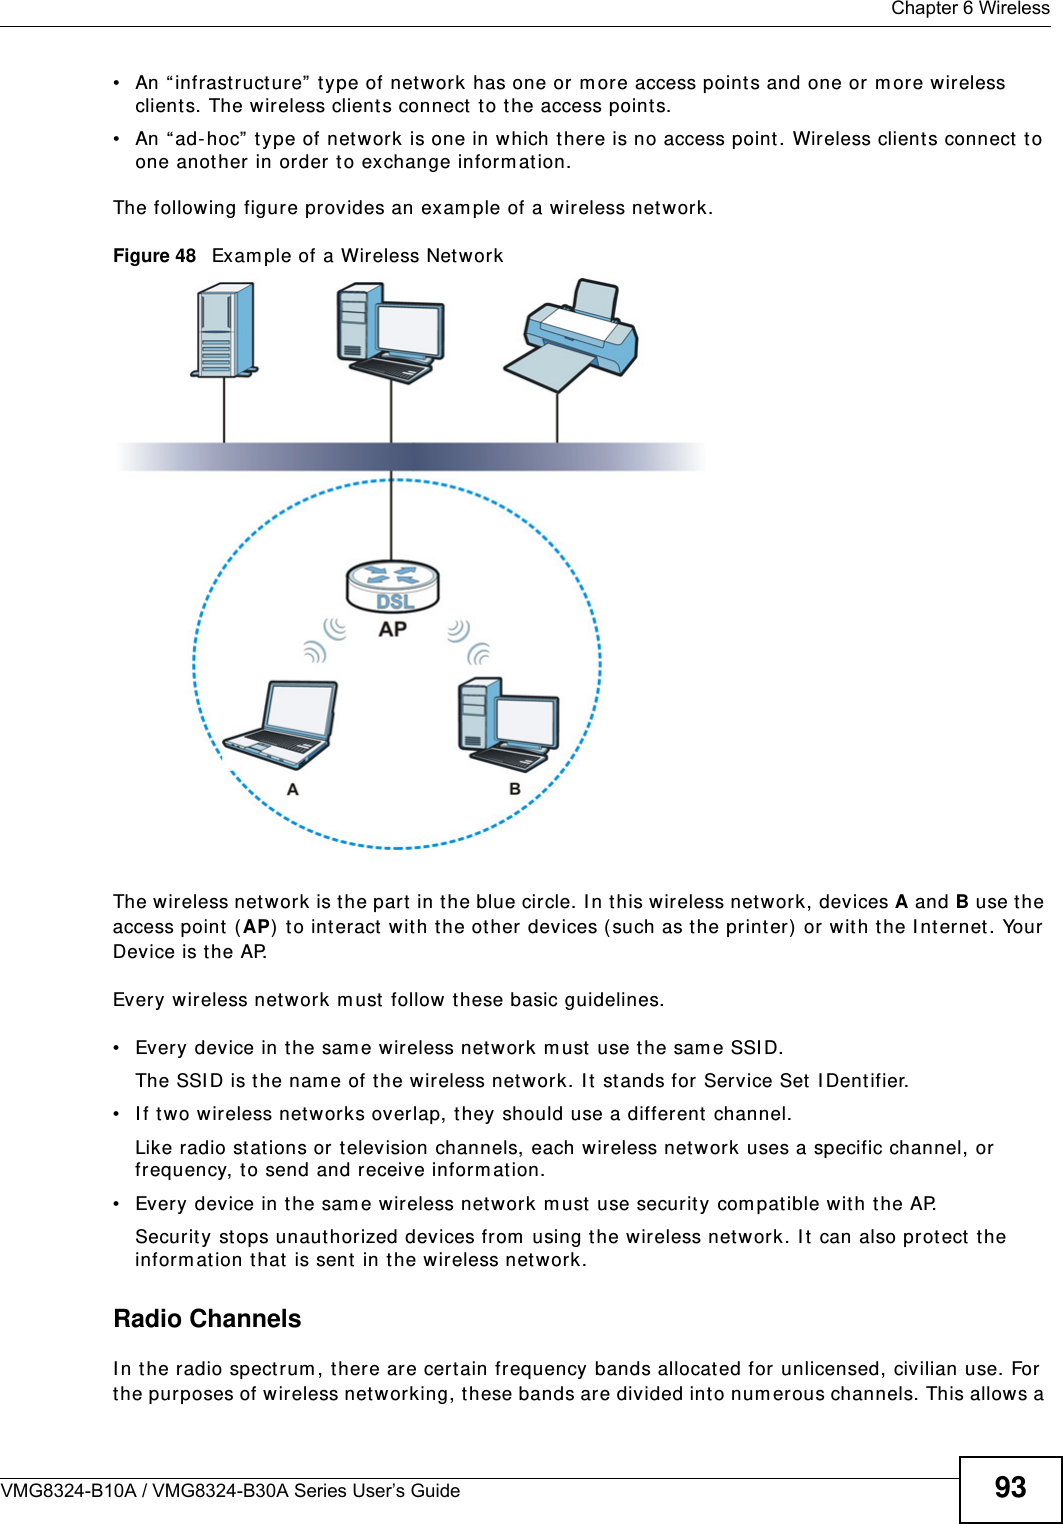  Chapter 6 WirelessVMG8324-B10A / VMG8324-B30A Series User’s Guide 93• An “ infrast ruct ure”  type of net work has one or m ore access points and one or m ore w ireless clients. The wireless client s connect t o the access point s.• An “ ad-hoc”  t ype of net work is one in which there is no access point. Wireless client s connect  t o one another in order  t o exchange inform ation.The following figure provides an exam ple of a wir eless net w ork.Figure 48   Exam ple of a Wireless NetworkThe wireless network is t he part in t he blue circle. I n t his wireless network, devices A and B use t he access point  (AP) t o int eract  wit h t he ot her  devices ( such as the print er)  or with t he I nt er net. Your Device is t he AP.Every wireless net work m ust  follow these basic guidelines.• Every device in the sam e wireless net work m ust  use t he sam e SSI D.The SSI D is t he nam e of t he wir eless net w ork. I t  st ands for Service Set  I Dent ifier.• I f t w o wireless networks overlap, t hey should use a different  channel.Like radio st at ions or t elevision channels, each wireless network uses a specific channel, or frequency, to send and receive inform at ion.• Every device in the sam e wireless net work m ust  use securit y com pat ible wit h the AP.Securit y st ops unaut hor ized devices from  using the wireless net work. I t can also protect  t he inform ation t hat is sent  in t he wireless net work.Radio ChannelsI n t he radio spectrum , t here are cert ain frequency bands allocat ed for unlicensed, civilian use. For the purposes of w ireless networking, t hese bands are divided into num erous channels. This allows a 